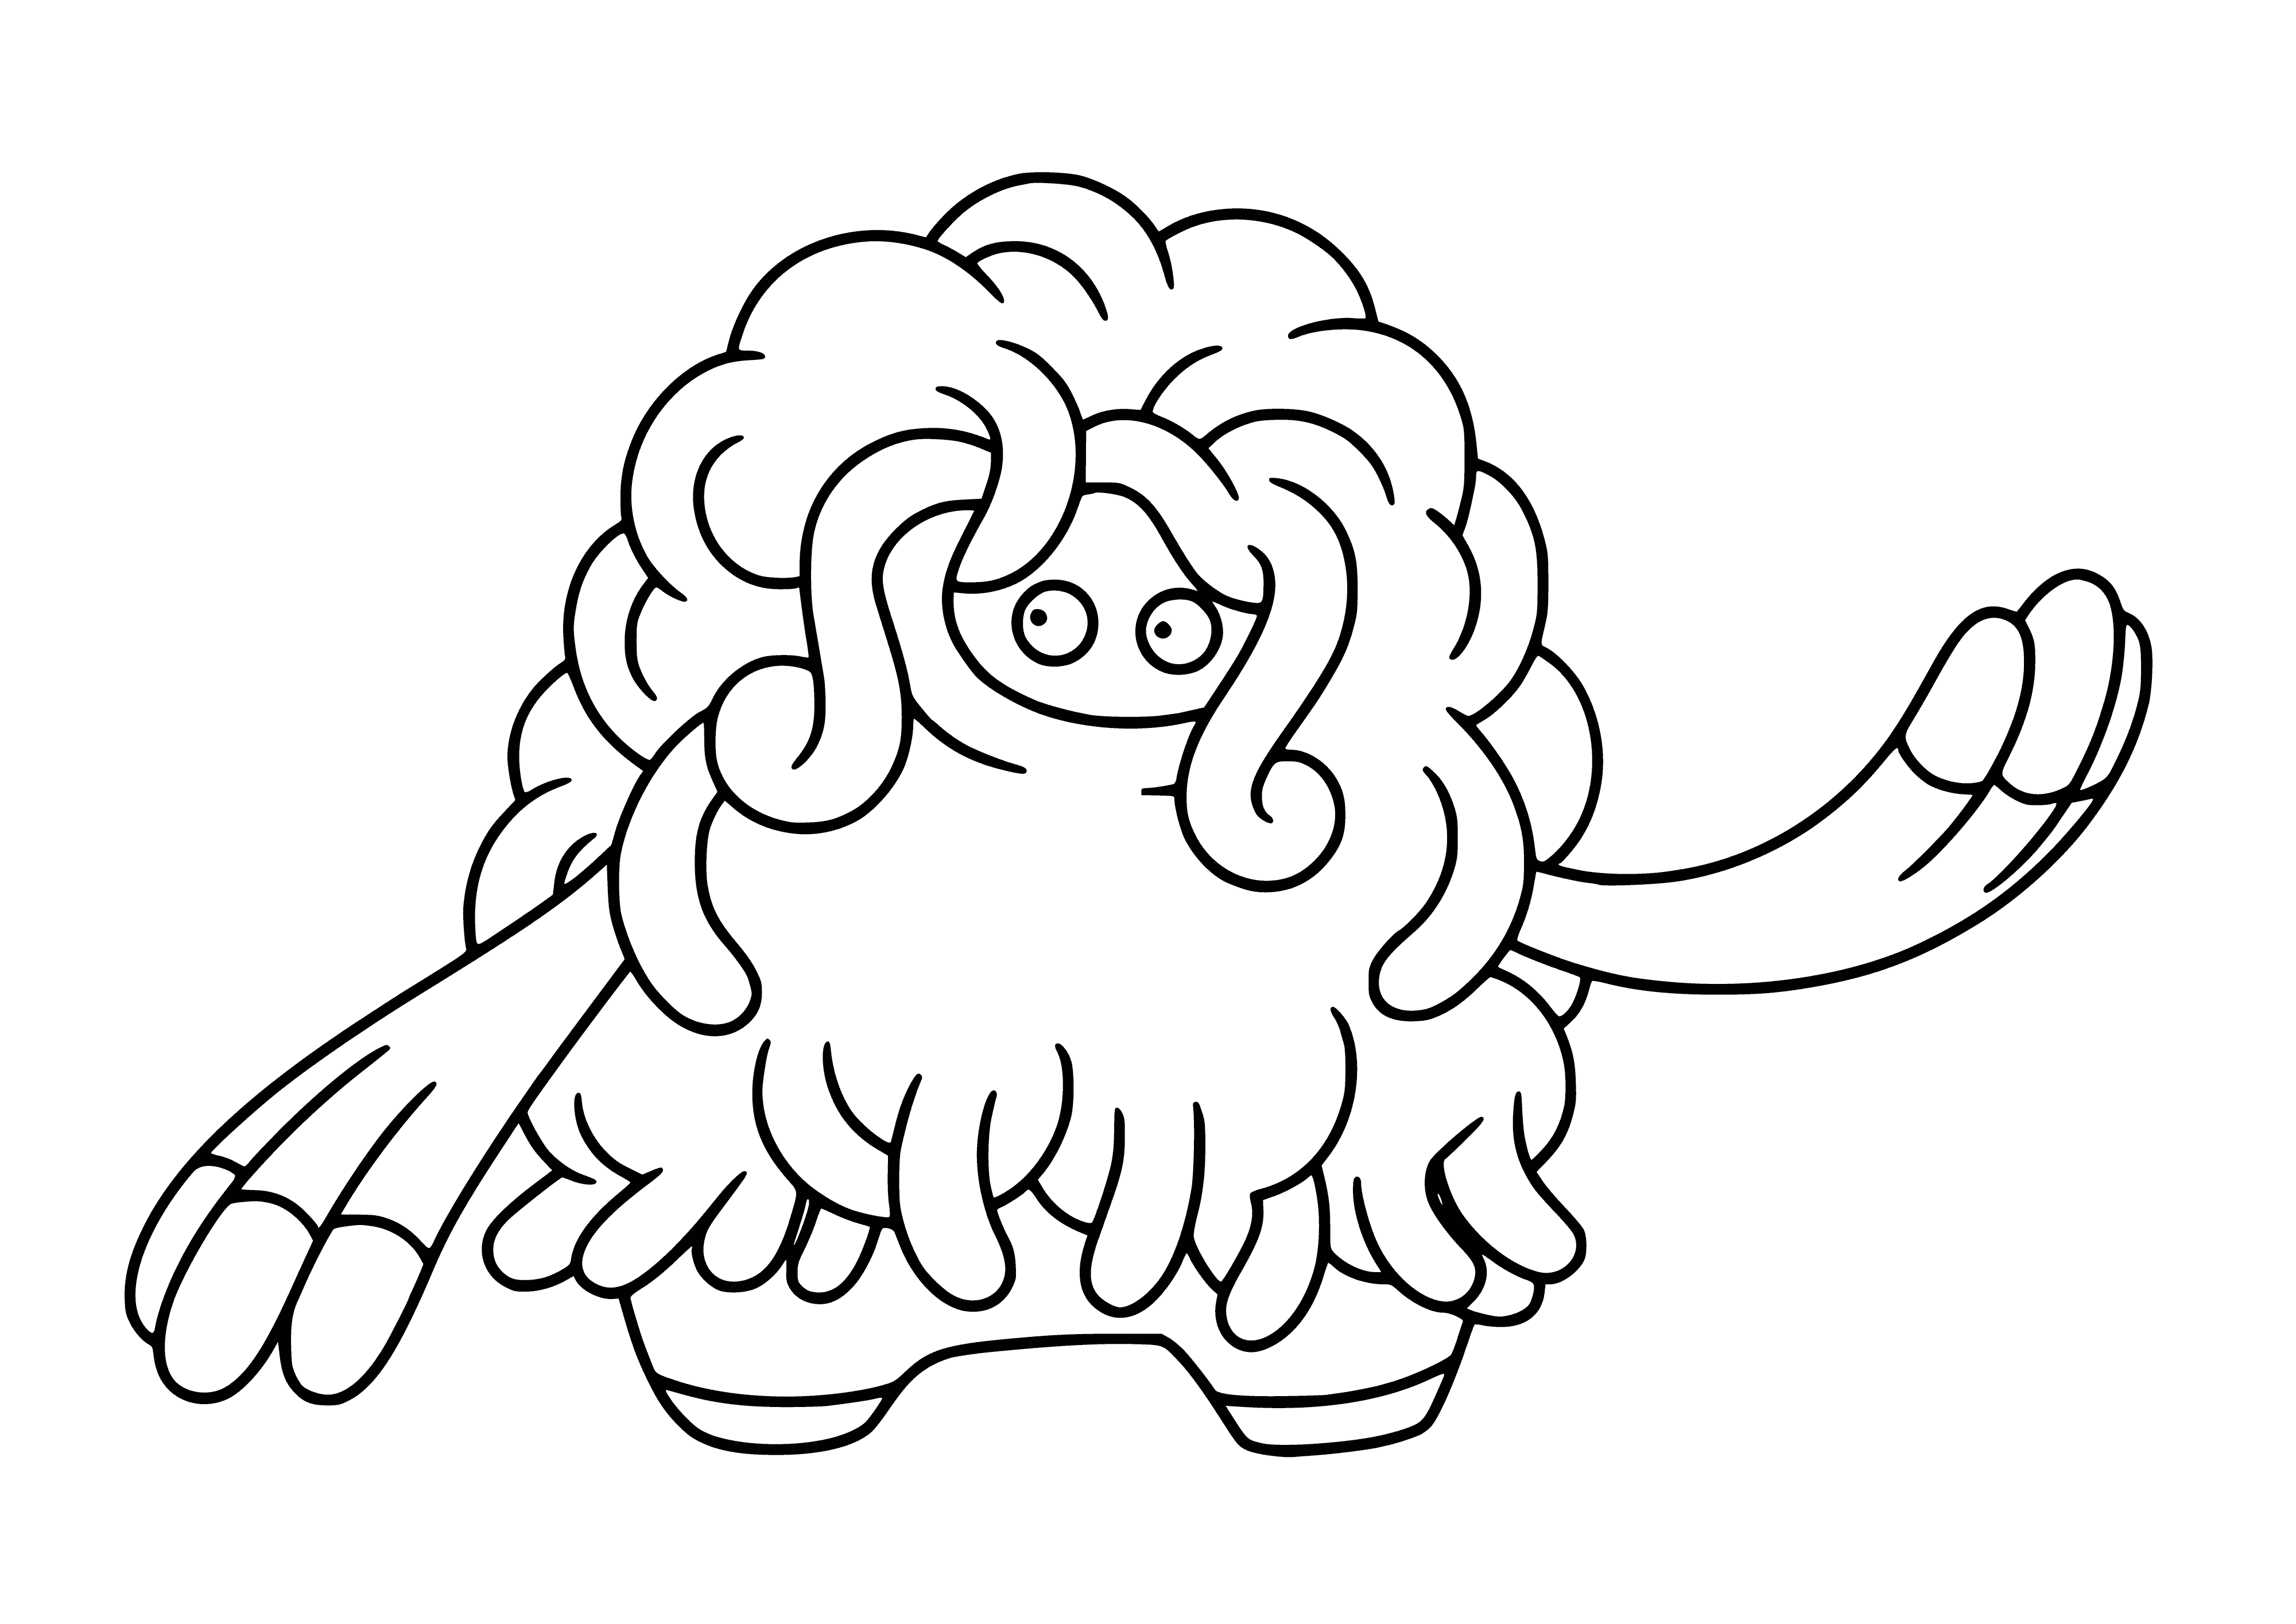 coloring page: Grass-type Pokemon Tangrowth is a big, shaggy brute with prehensile vines that it uses for swinging and attacking. Covered in thick hide and orange spots, it boasts sharp teeth and a powerful body.